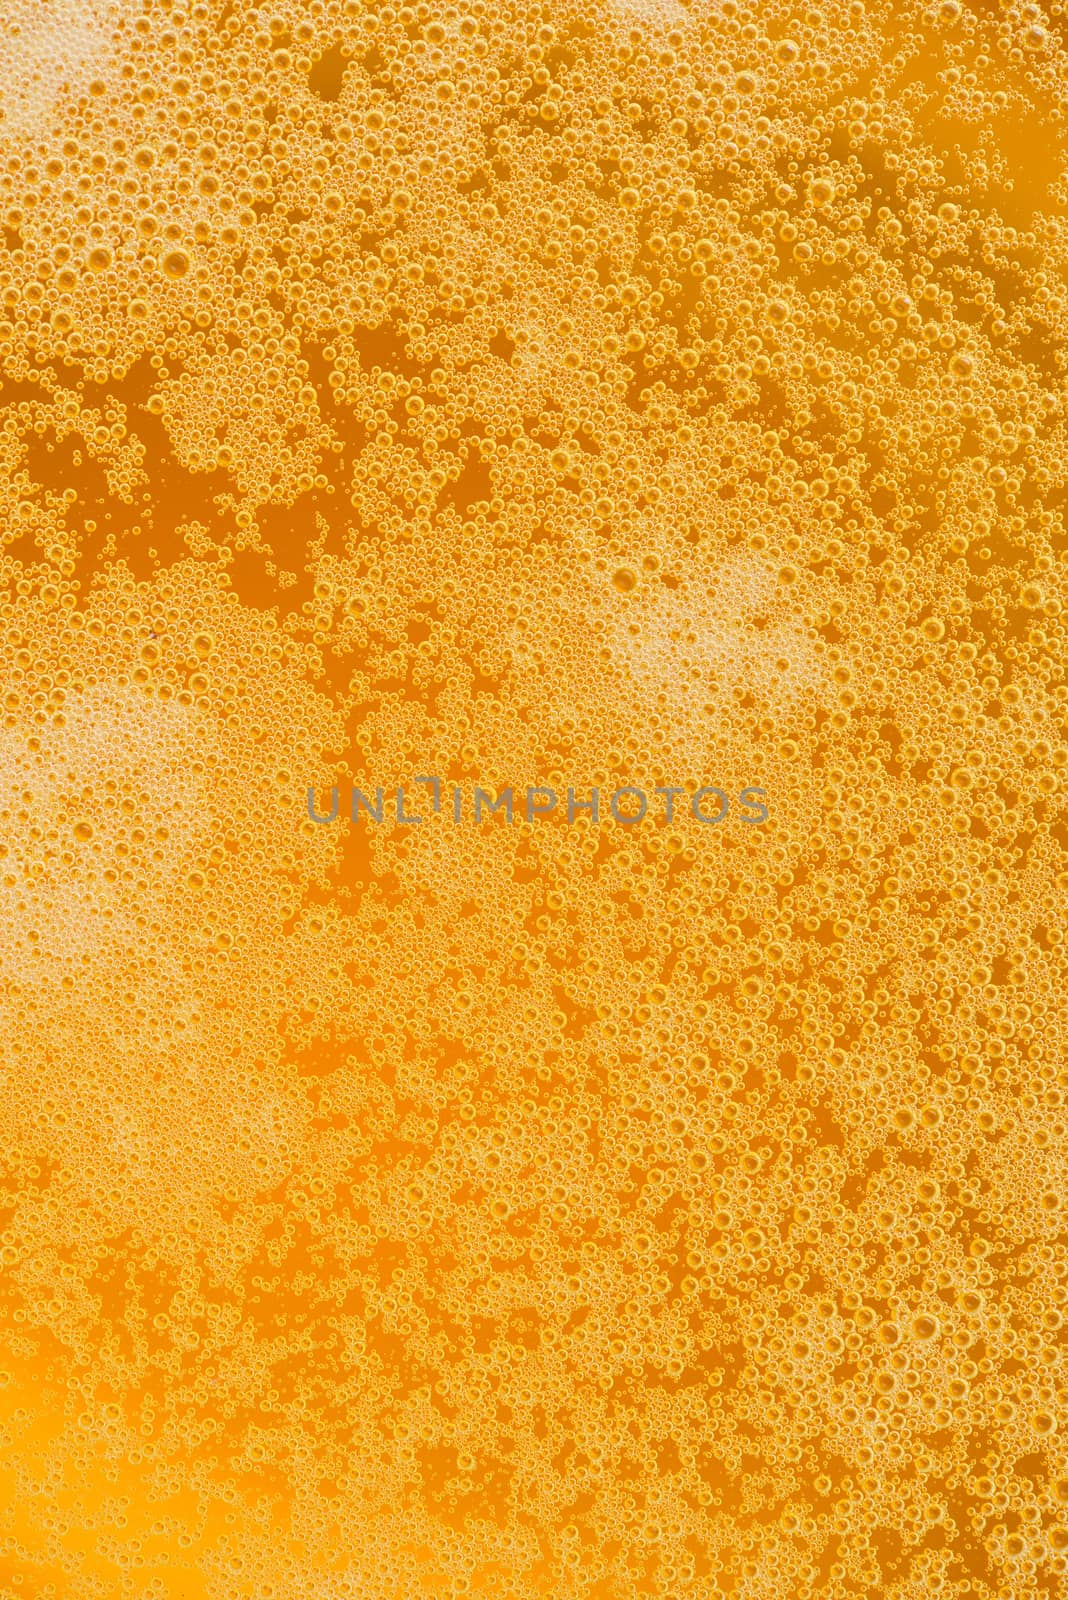 beer froth by antpkr